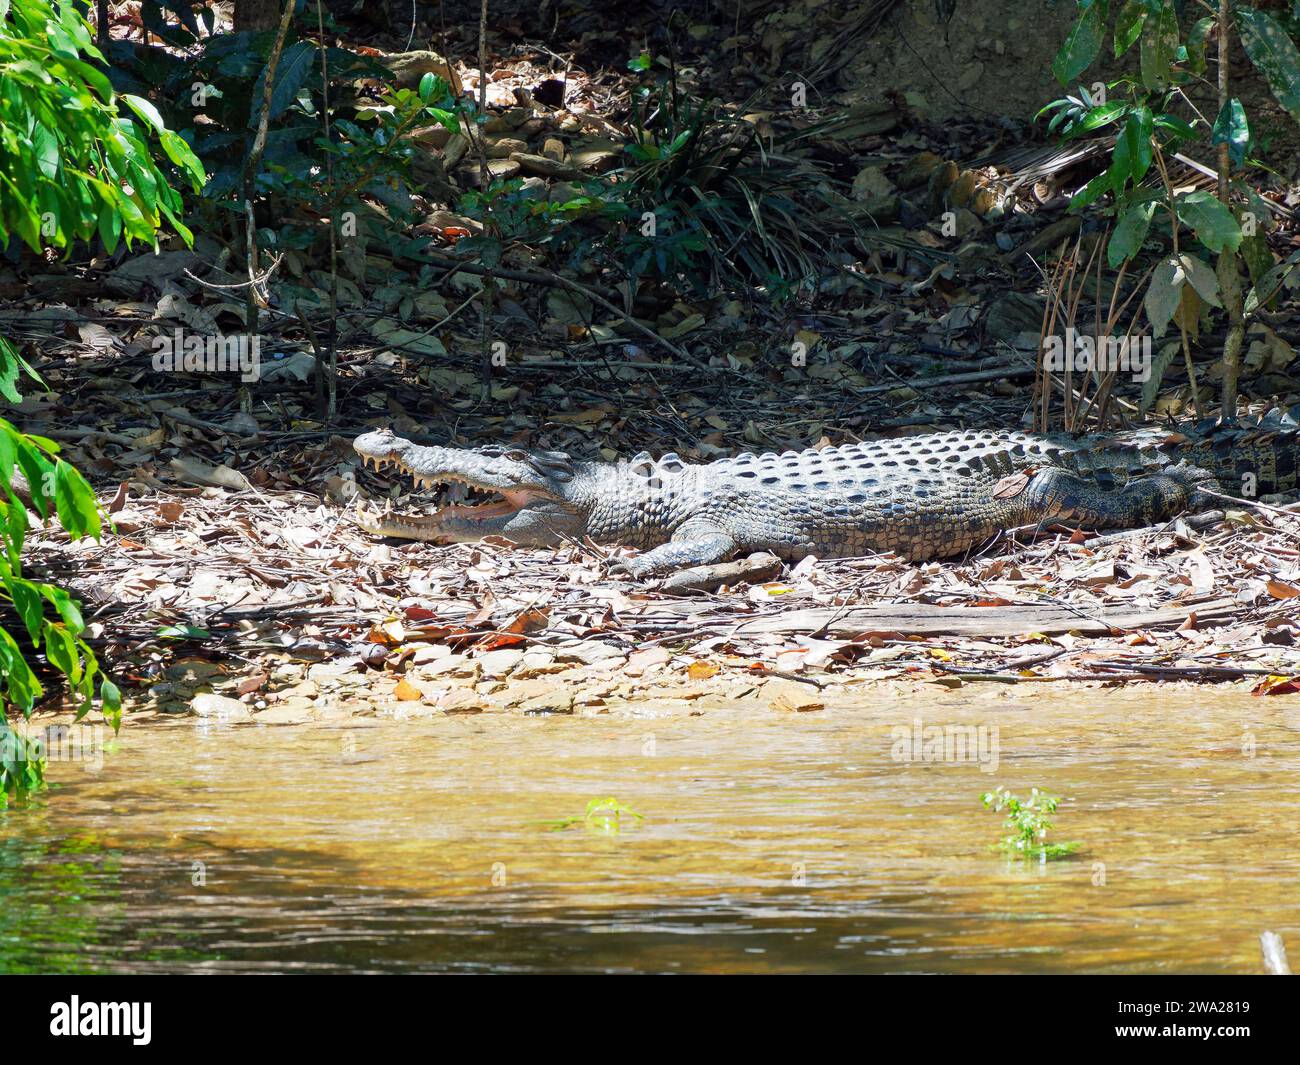 View of a crocodile resting on the banks of the Daintree River near Cape Tribulation in north Queensland Australia Stock Photo